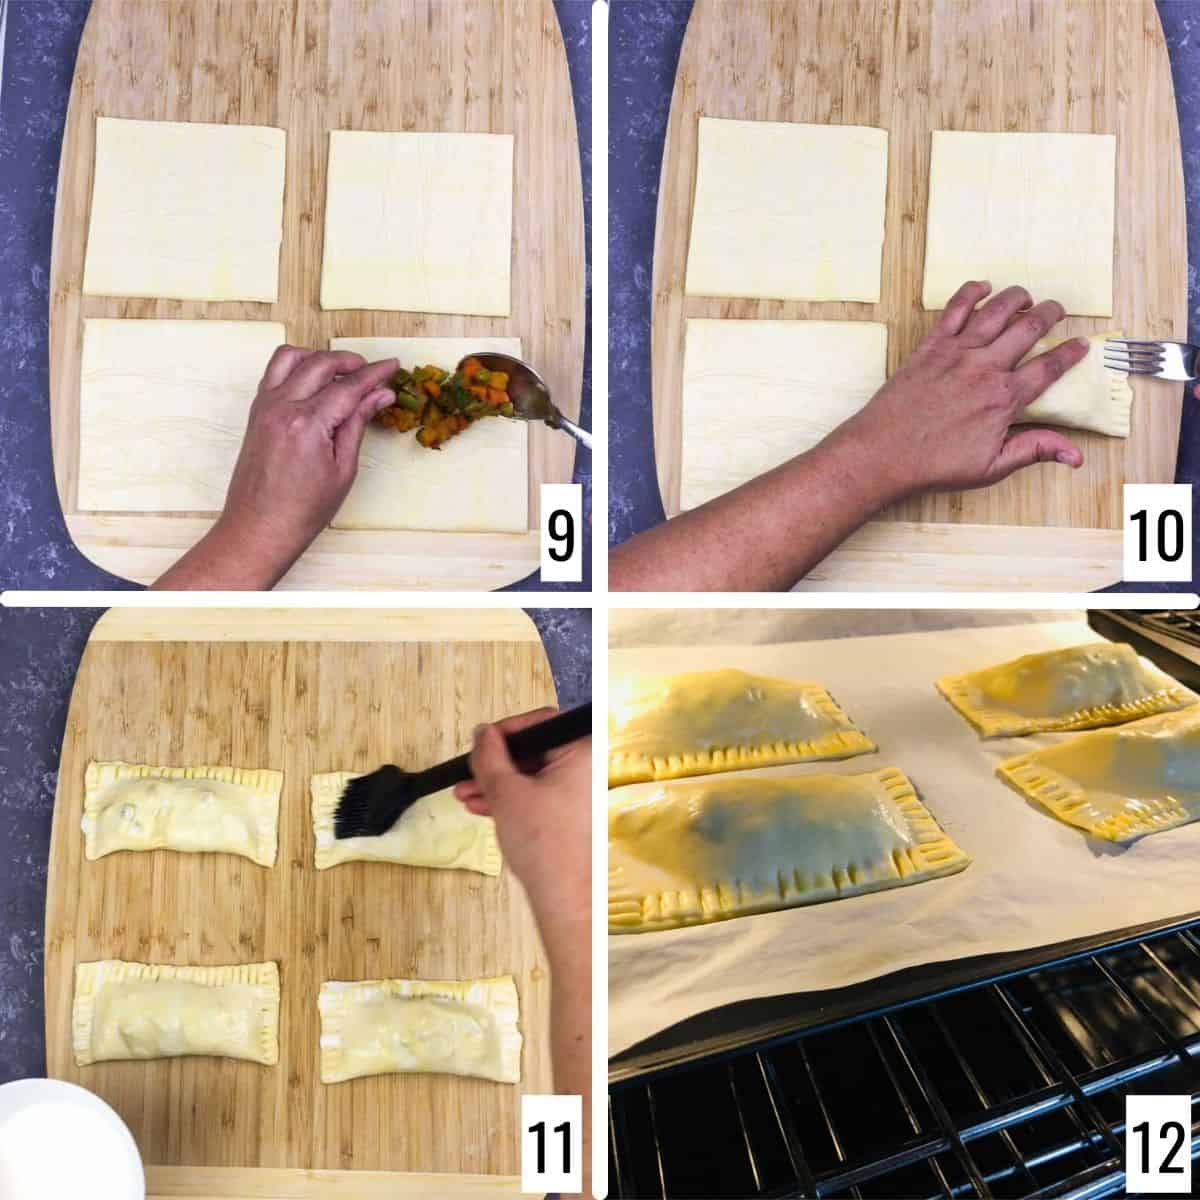 fill in pastry sheets and bake.